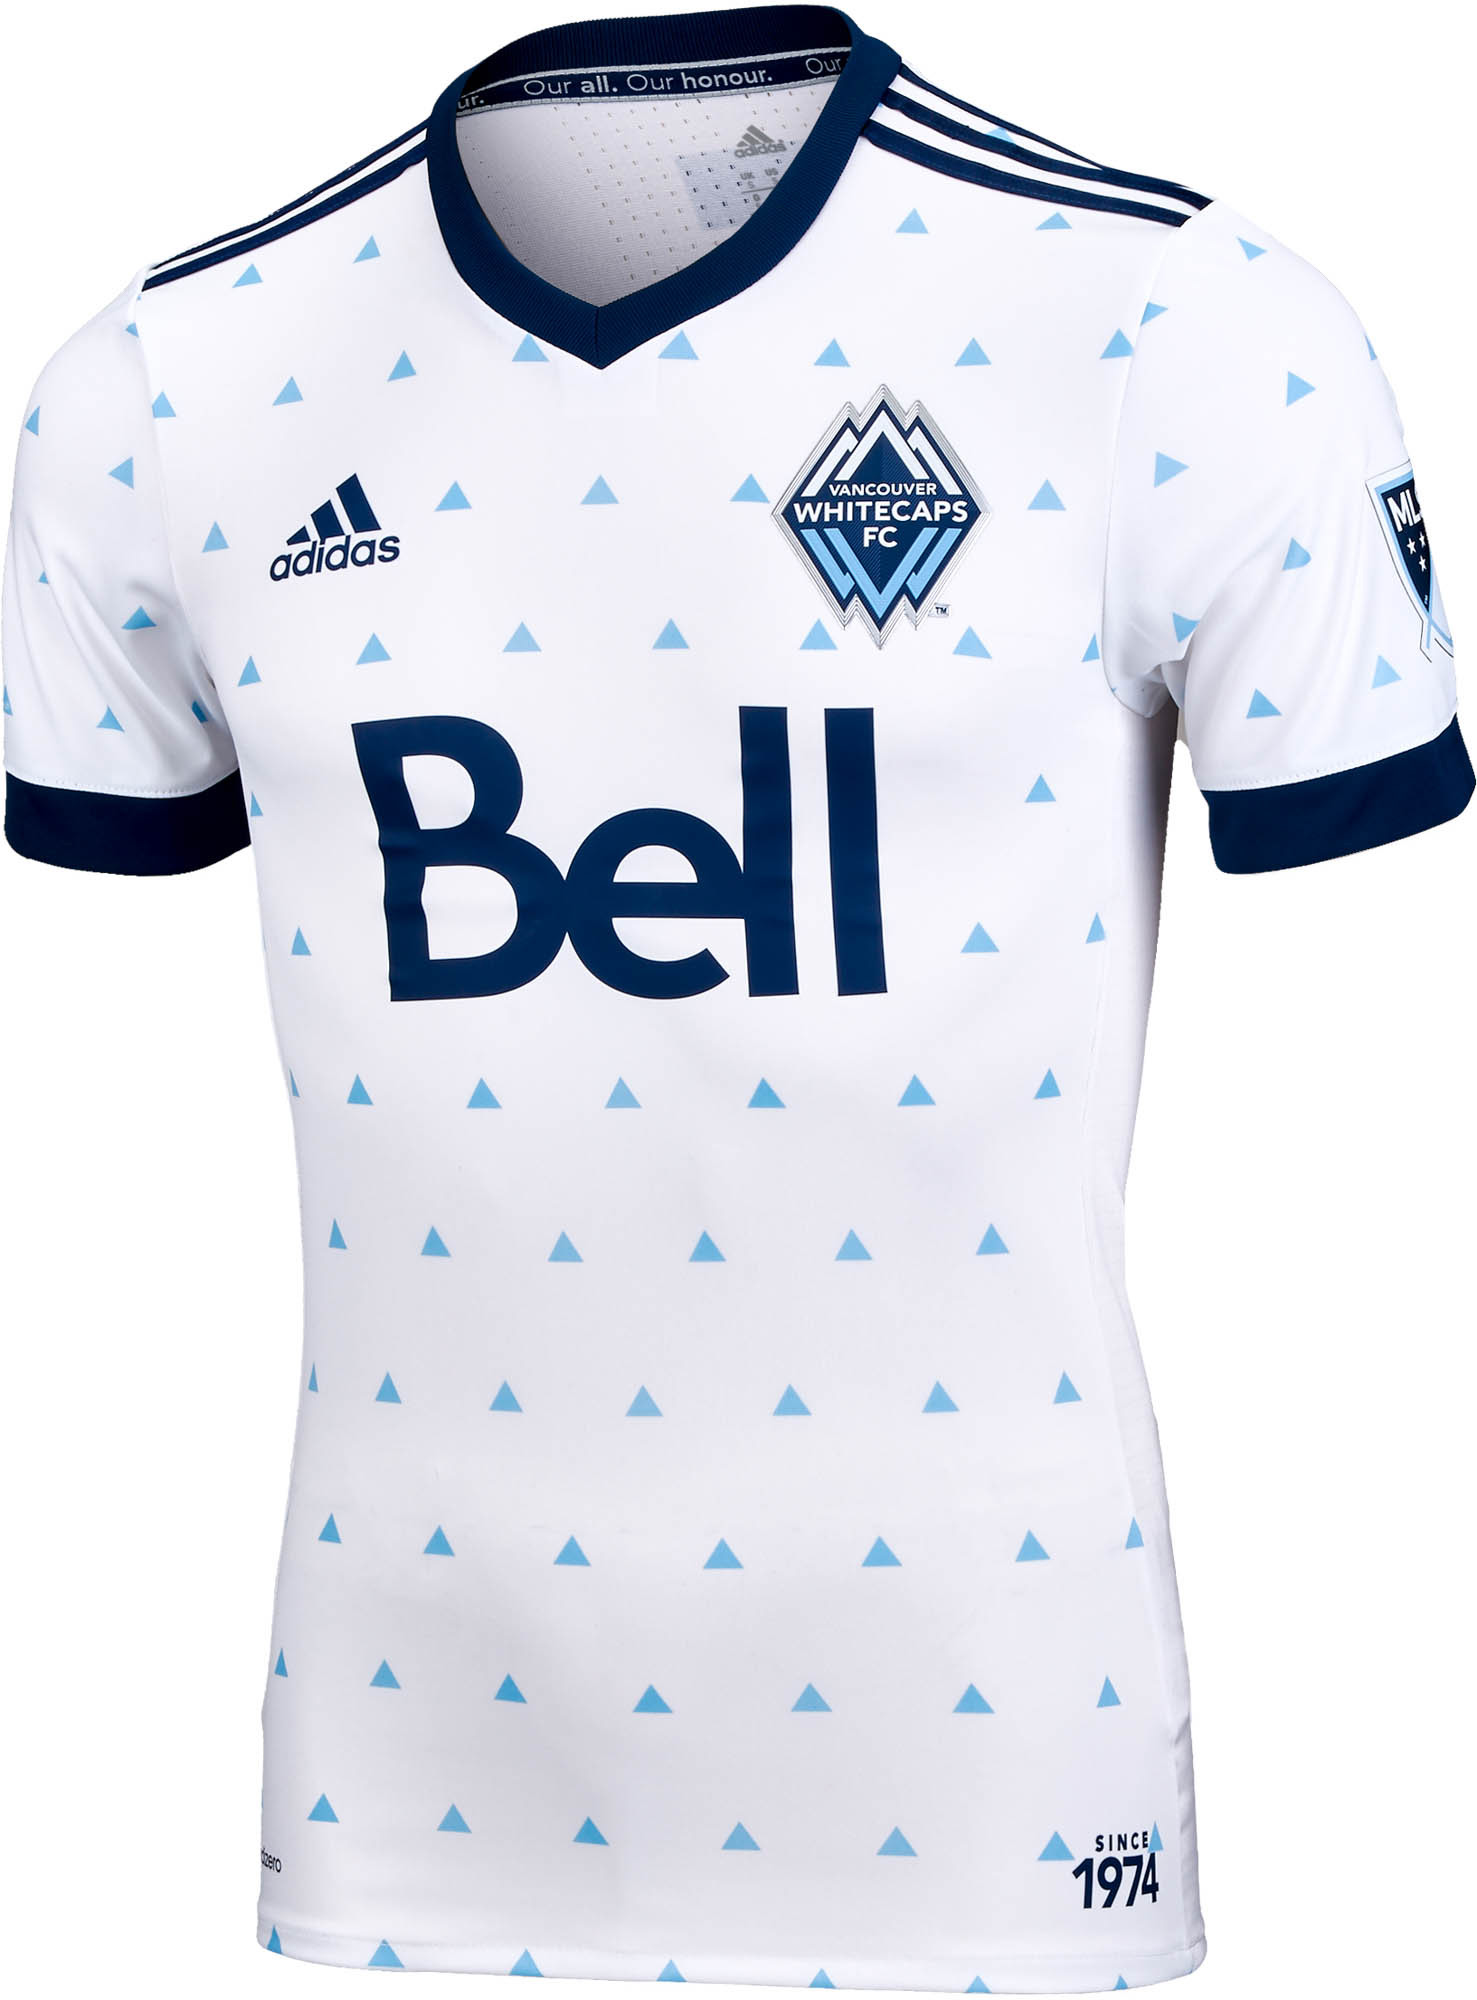 ADIDAS VANCOUVER WHITECAPS M $130 RETAIL JERSEY AUTHENTIC MLS SOCCER NWT  GI6413